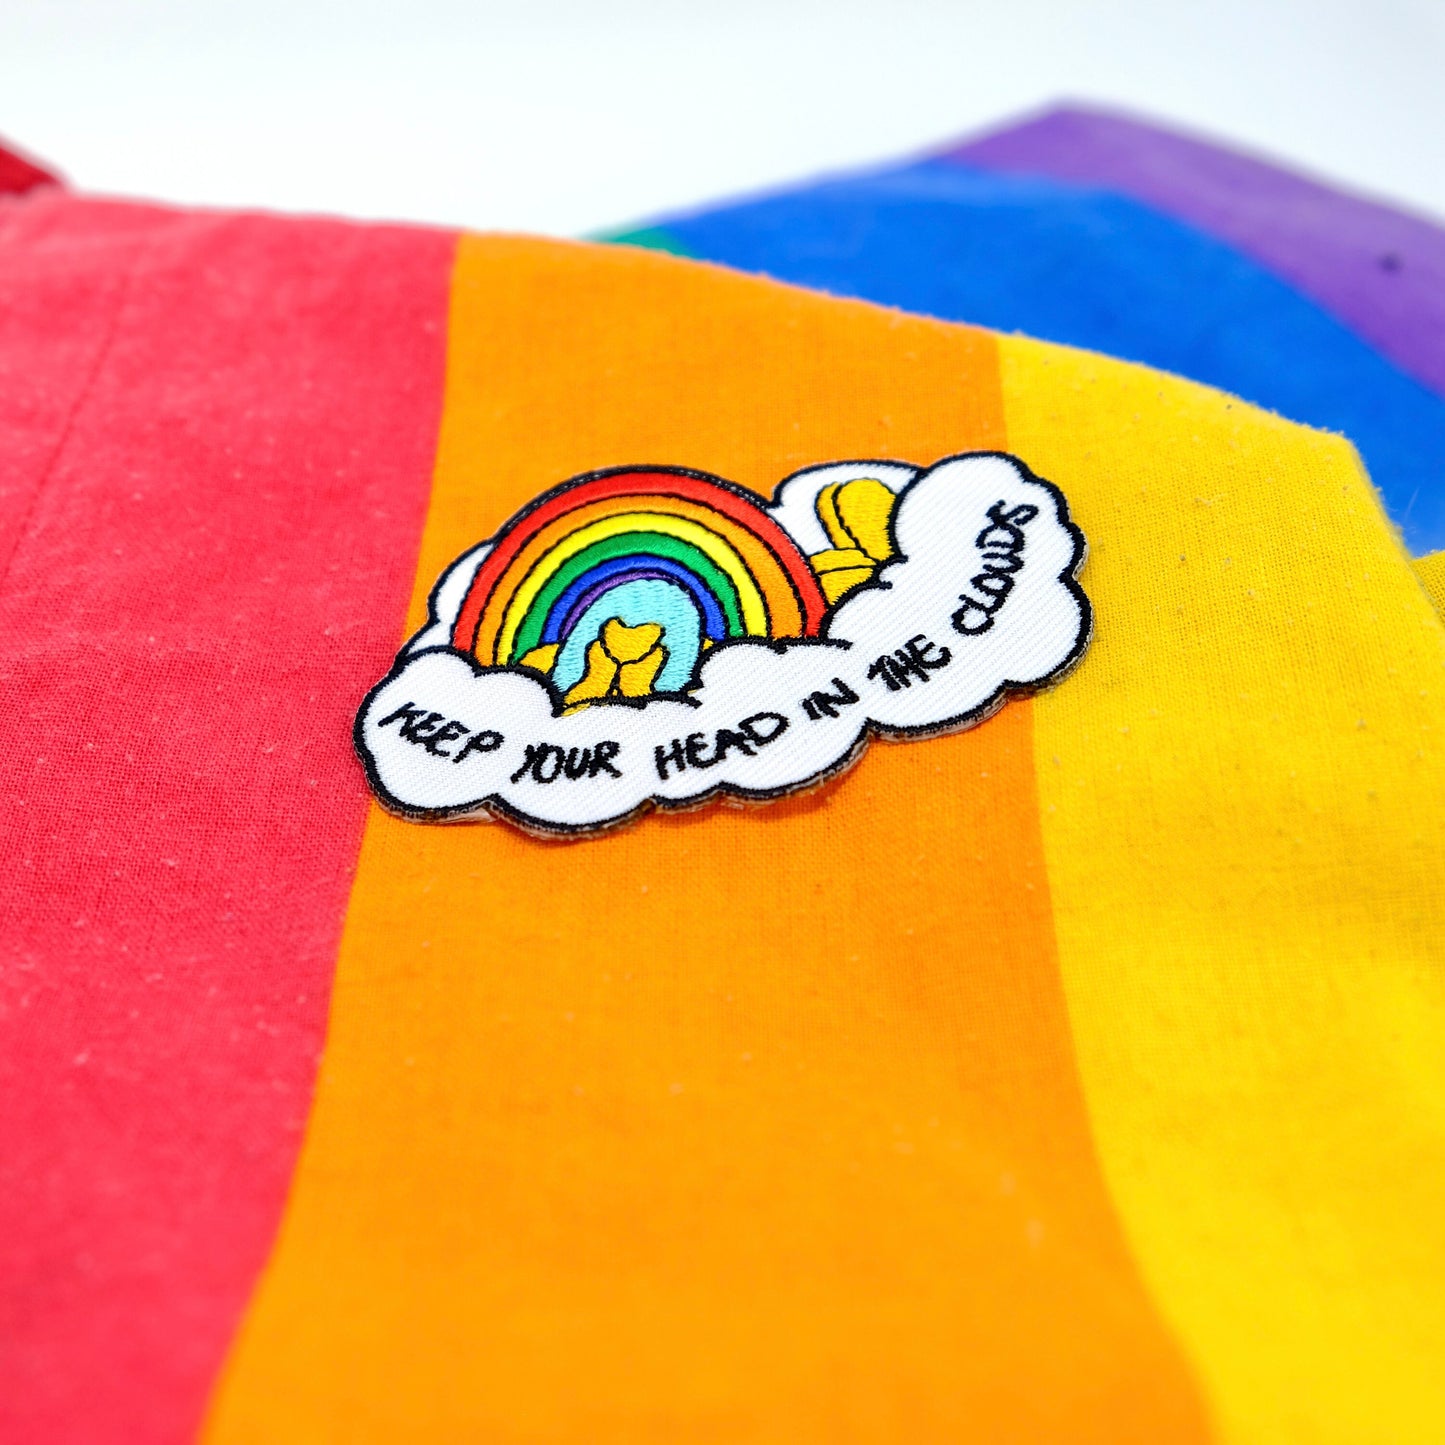 Head In The Clouds Iron-on Embroidery - Positive Rainbow Affirmation Patch - Dreamers Patch with Rainbow Embroidery